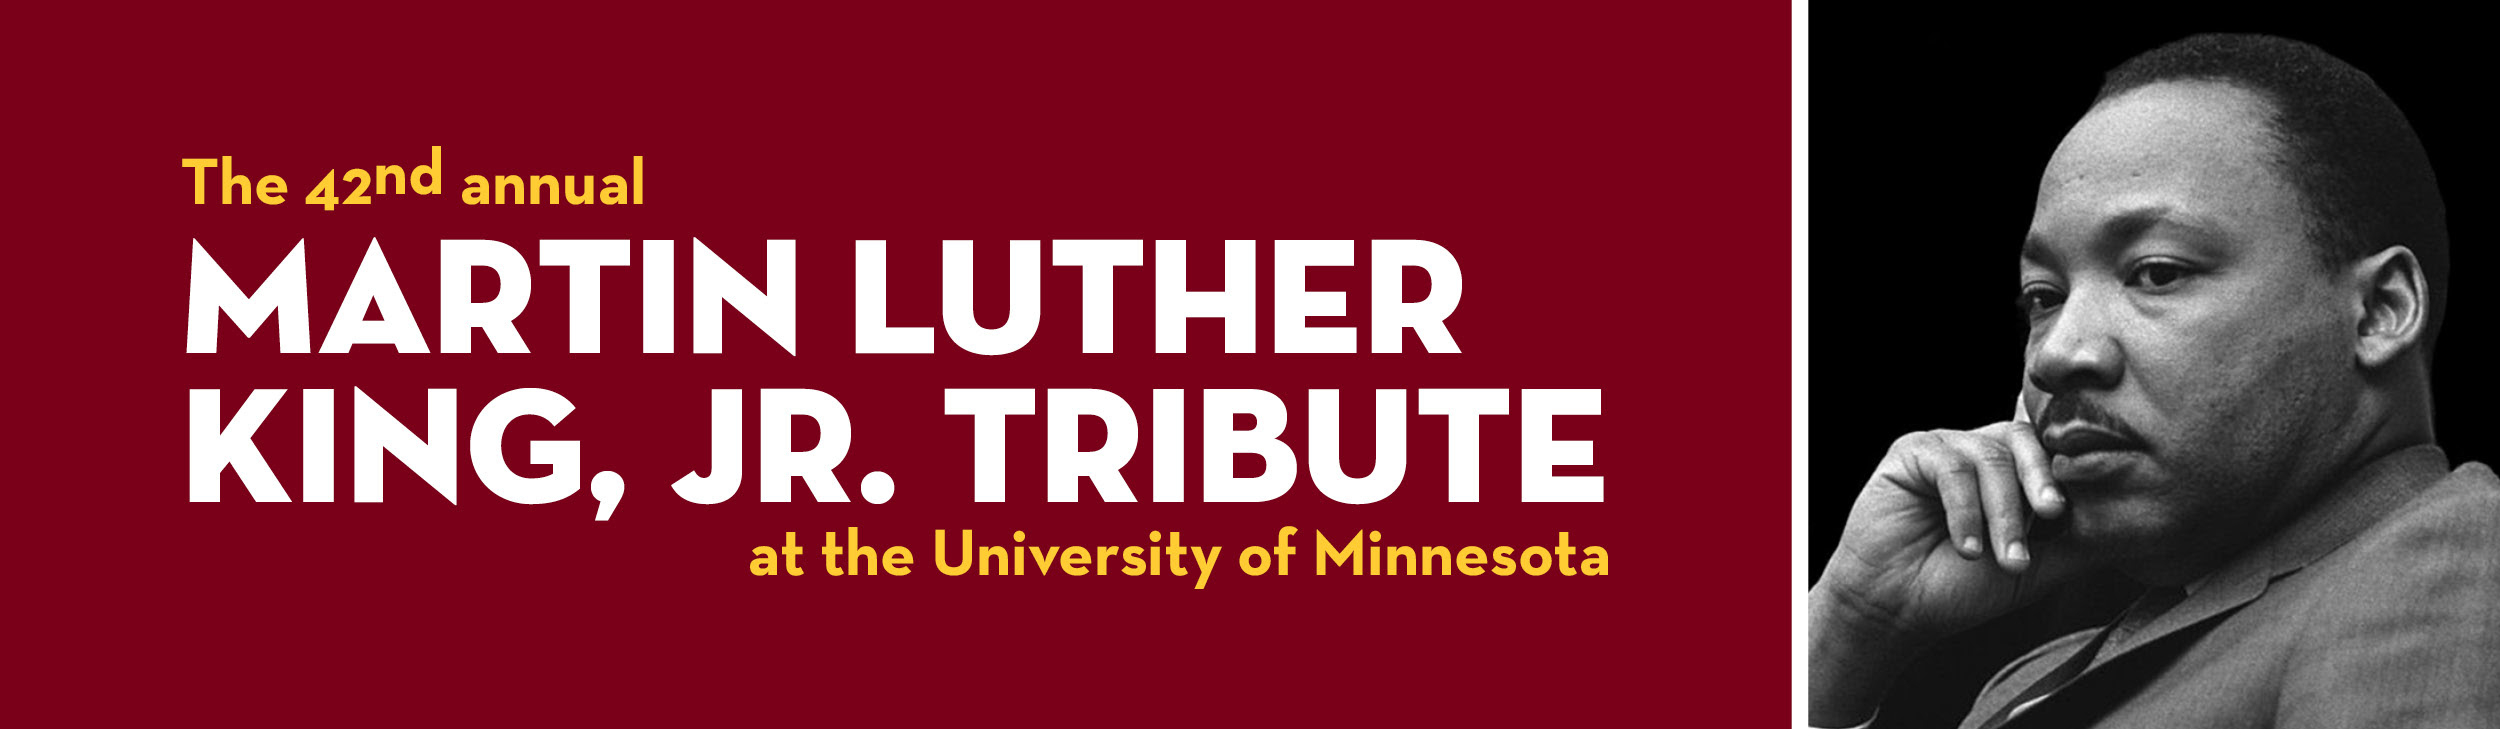 The 42nd Annual Martin Luther King, Jr. Tribute at the University of Minnesota. Black and white photo of Martin Luther King, Jr.